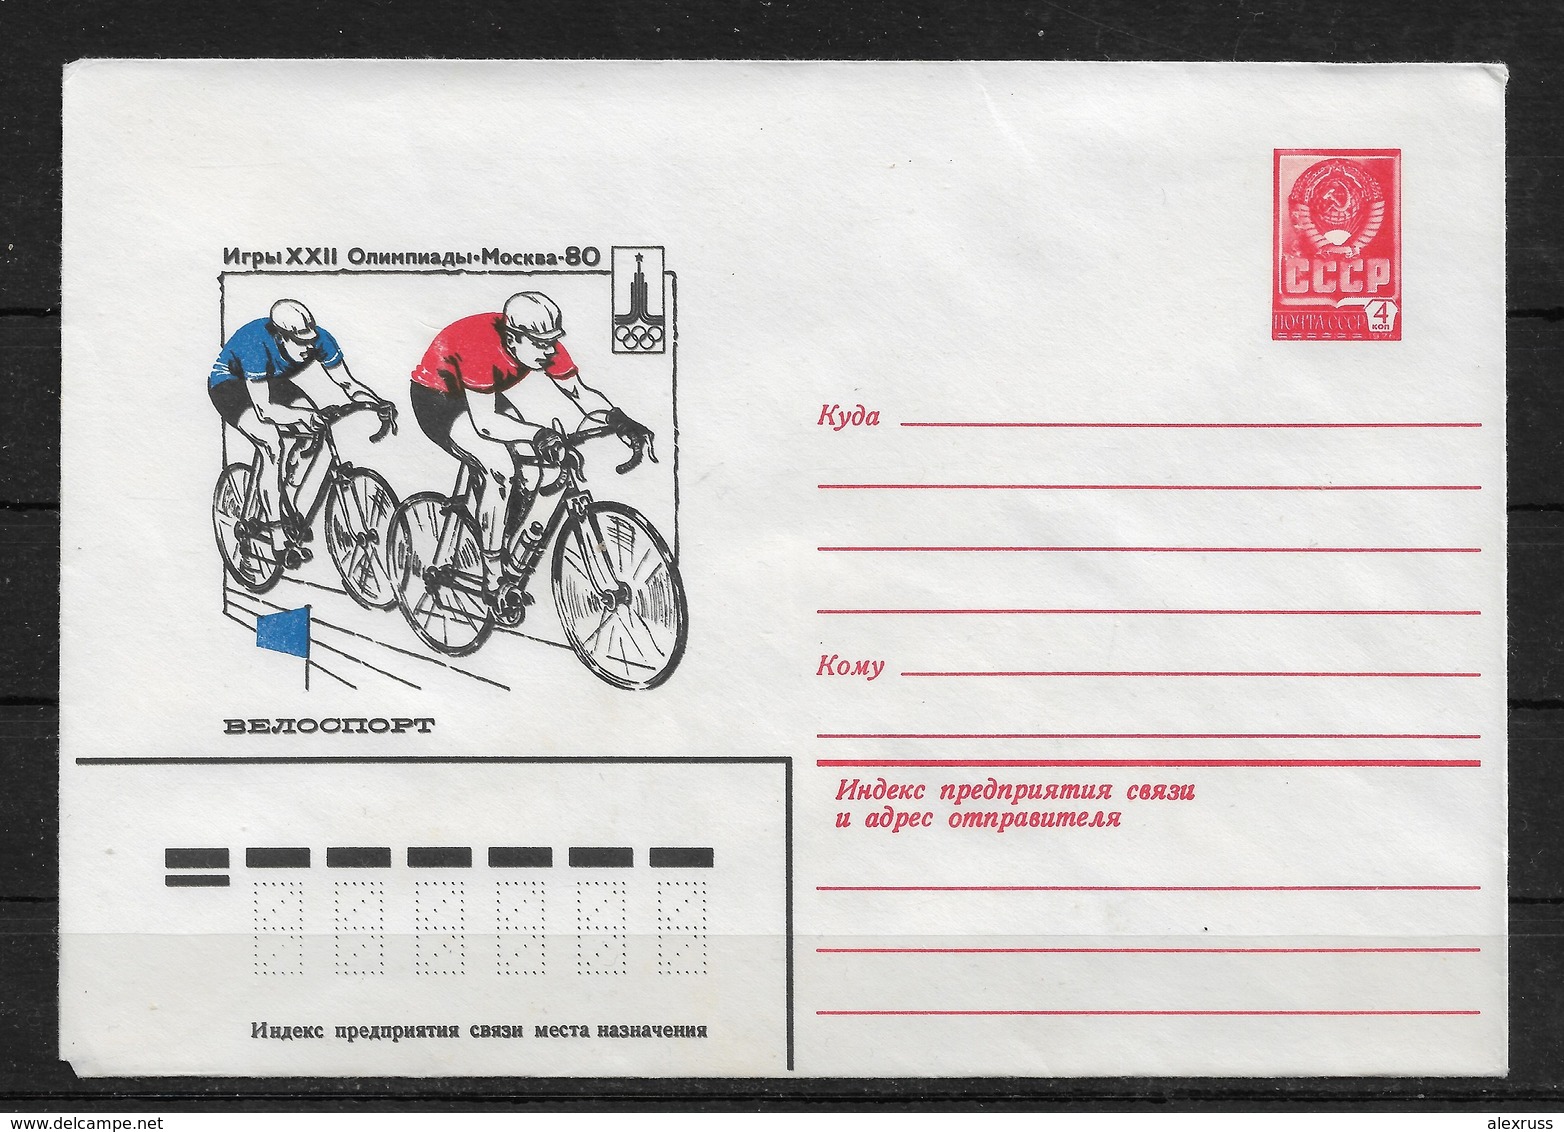 Russia/USSR 1980,Cachet Cover, Moscow'80 Olympics, Cycling,VF Unused ! (NR50) - Wielrennen